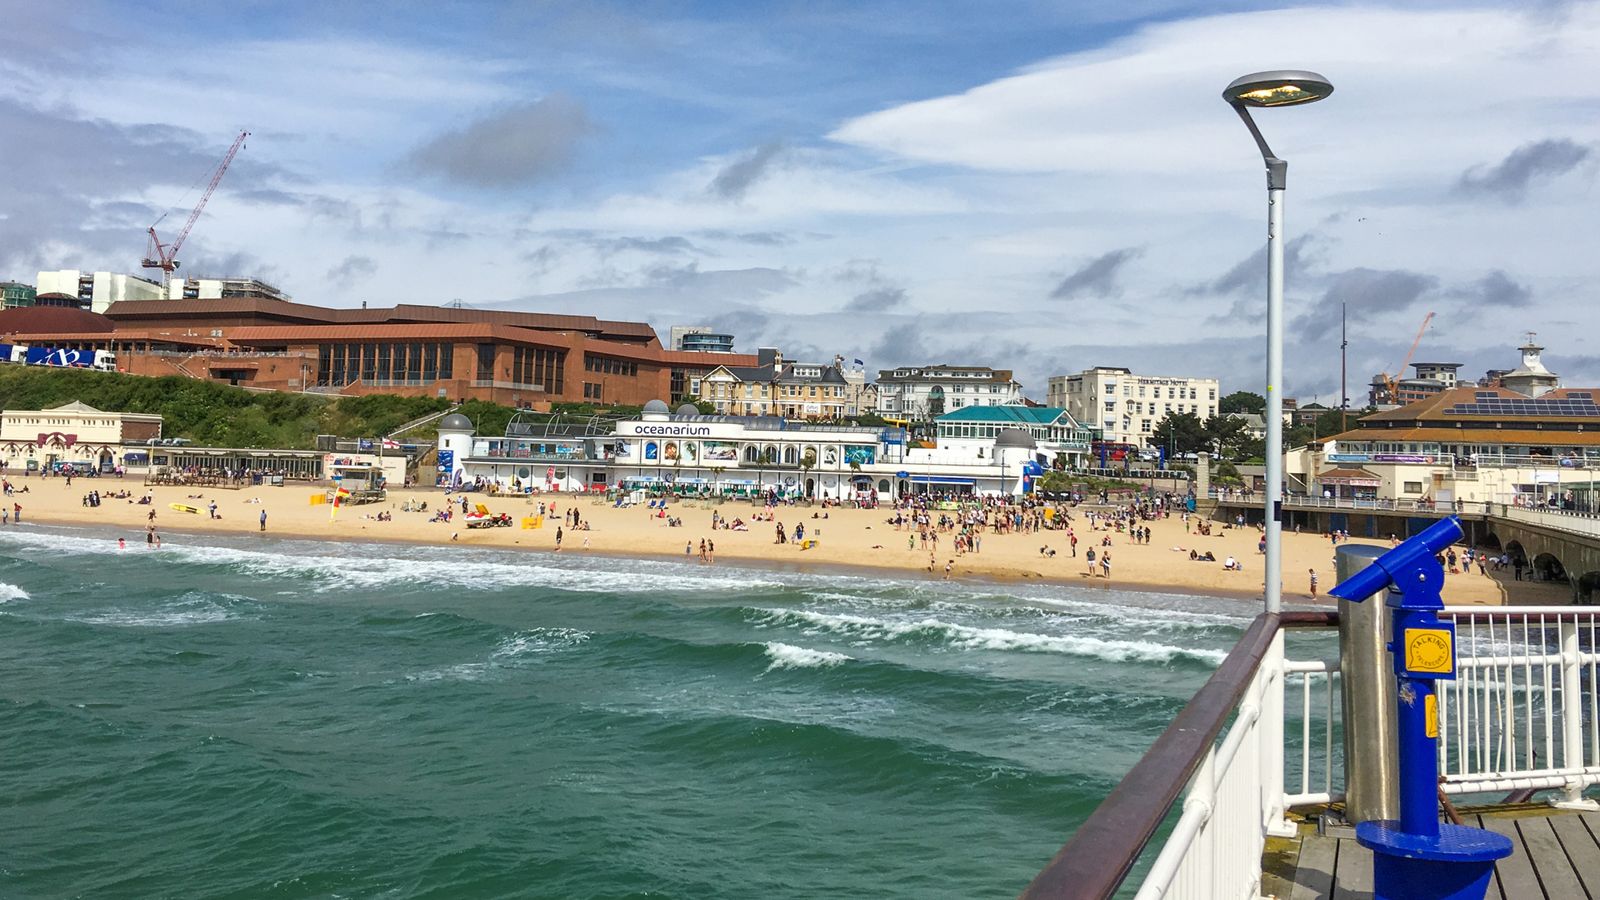 Man accused of raping 15-year-old girl in sea on summer day at Bournemouth beach